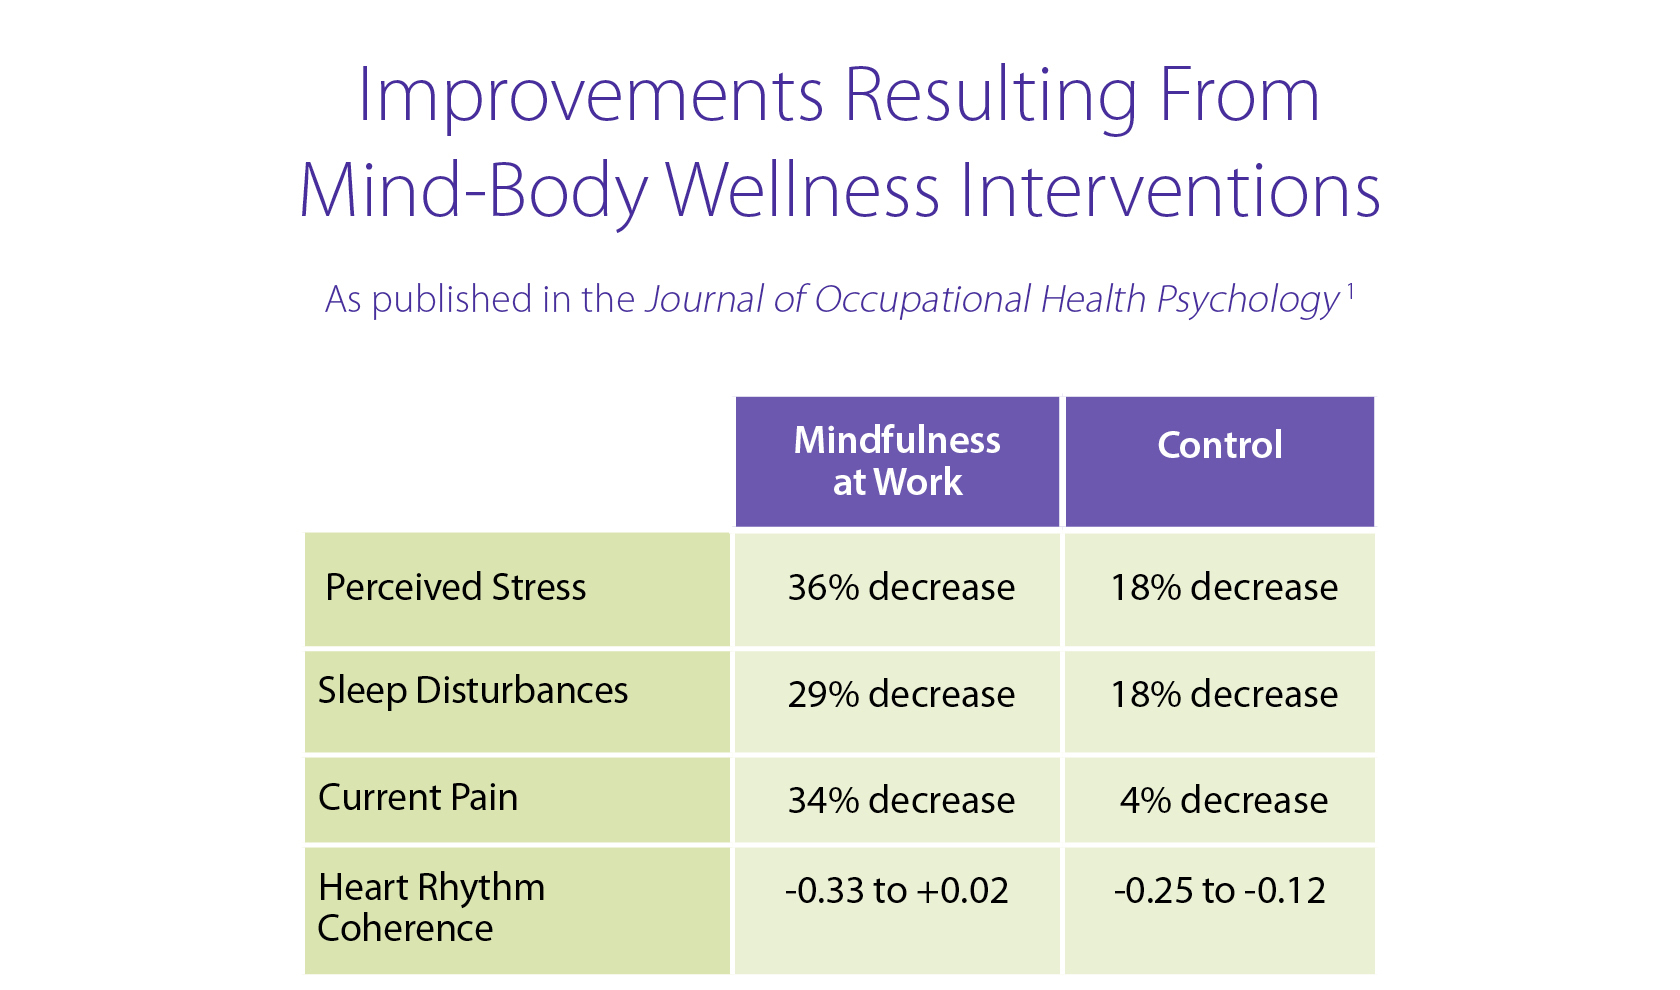 Improvements resulting from mind-body wellness interventions